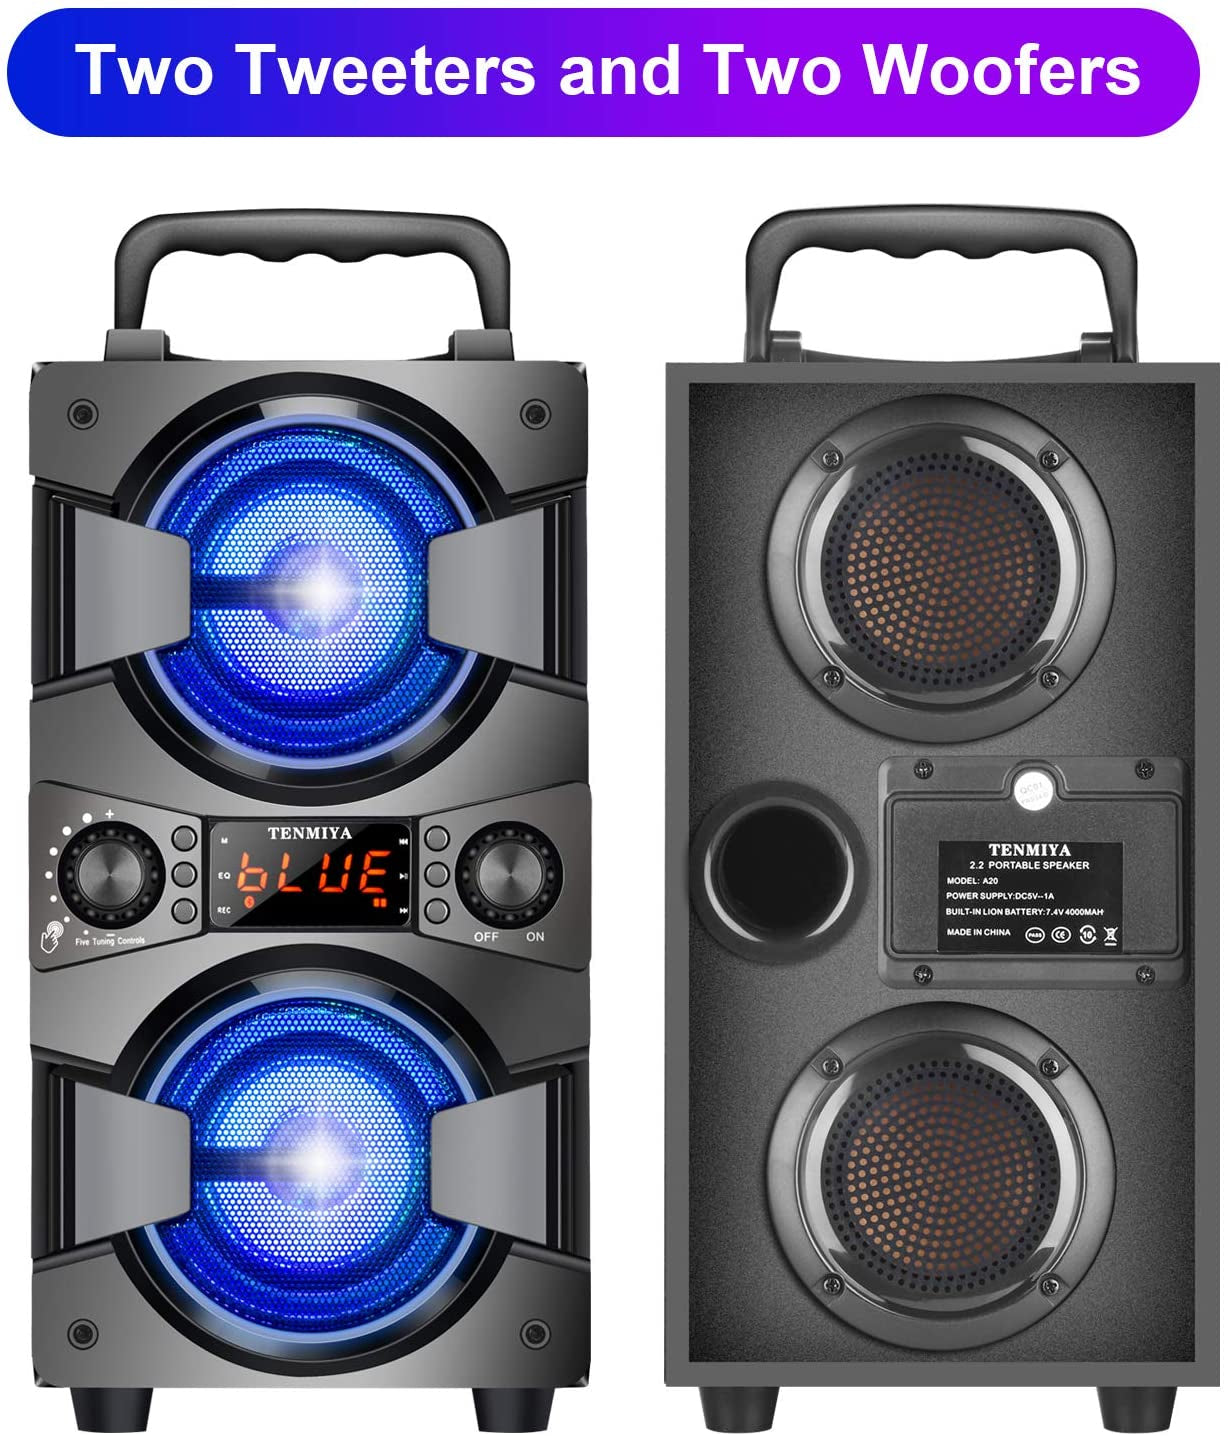 High-Quality 60W Portable Bluetooth Speaker with Dual Subwoofer for Enhanced Bass, FM Radio, Built-in Microphone, LED Lights, Remote Control, EQ, and Immersive Stereo Sound System - Perfect for Home, Outdoor Parties, and Camping (Includes 1 Microphone)